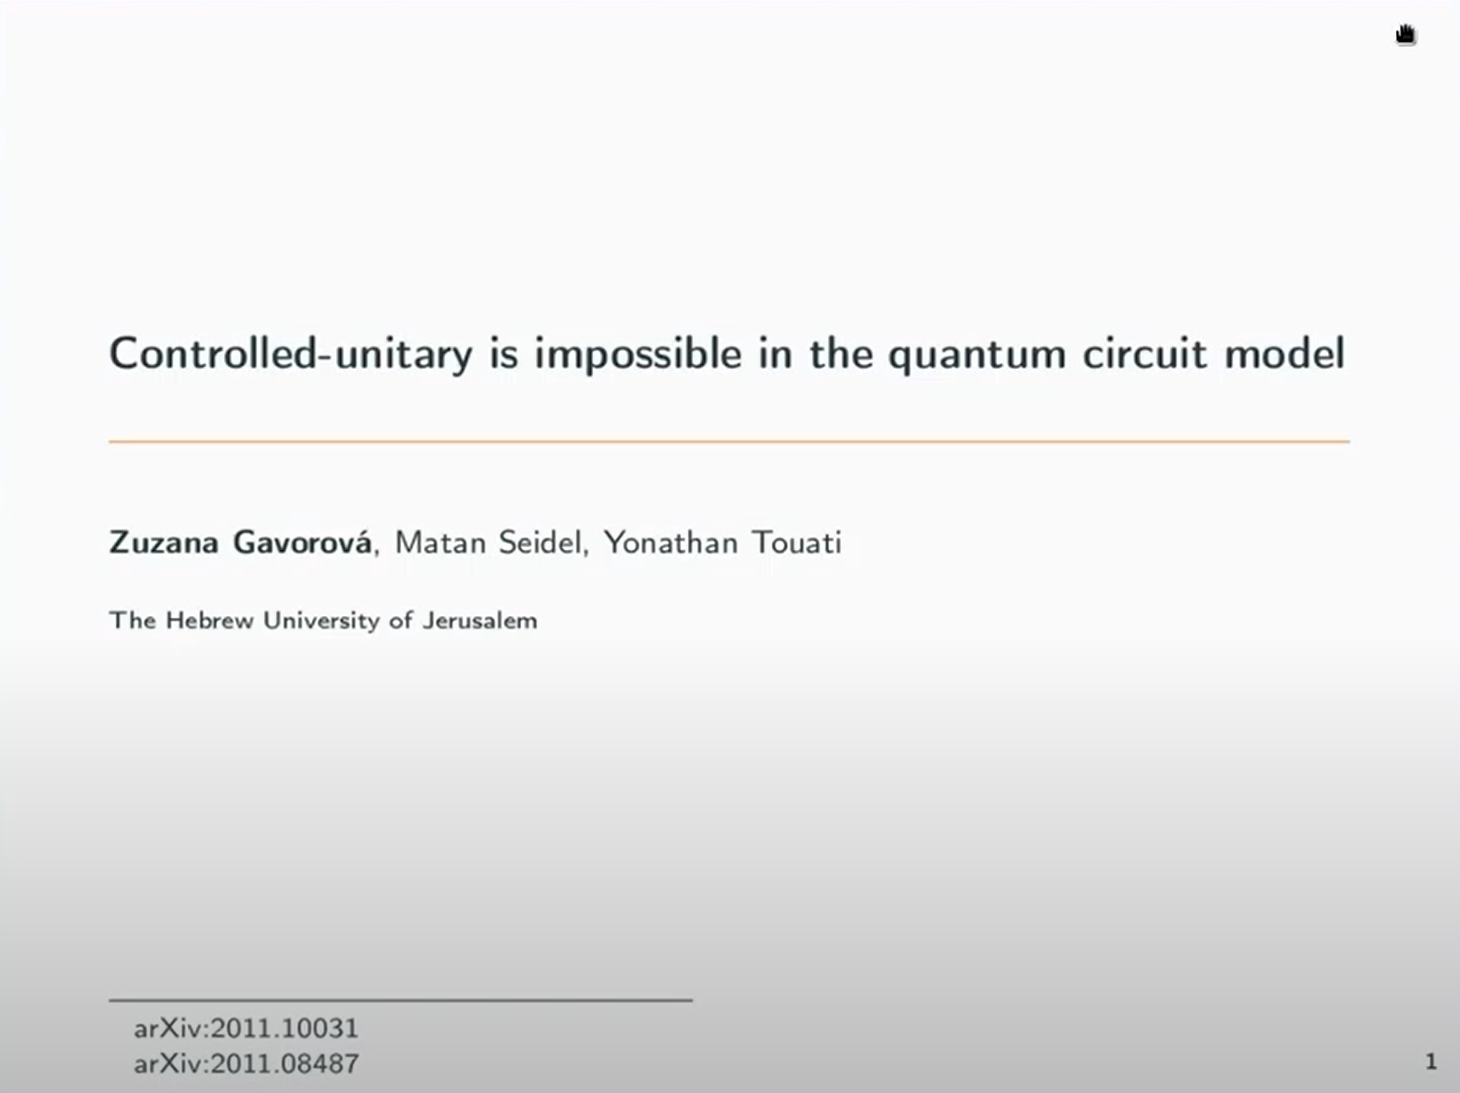 Zuzana Gavorova (The Hebrew University of Jerusalem): Controlled-unitary is impossible in the quantum circuit model